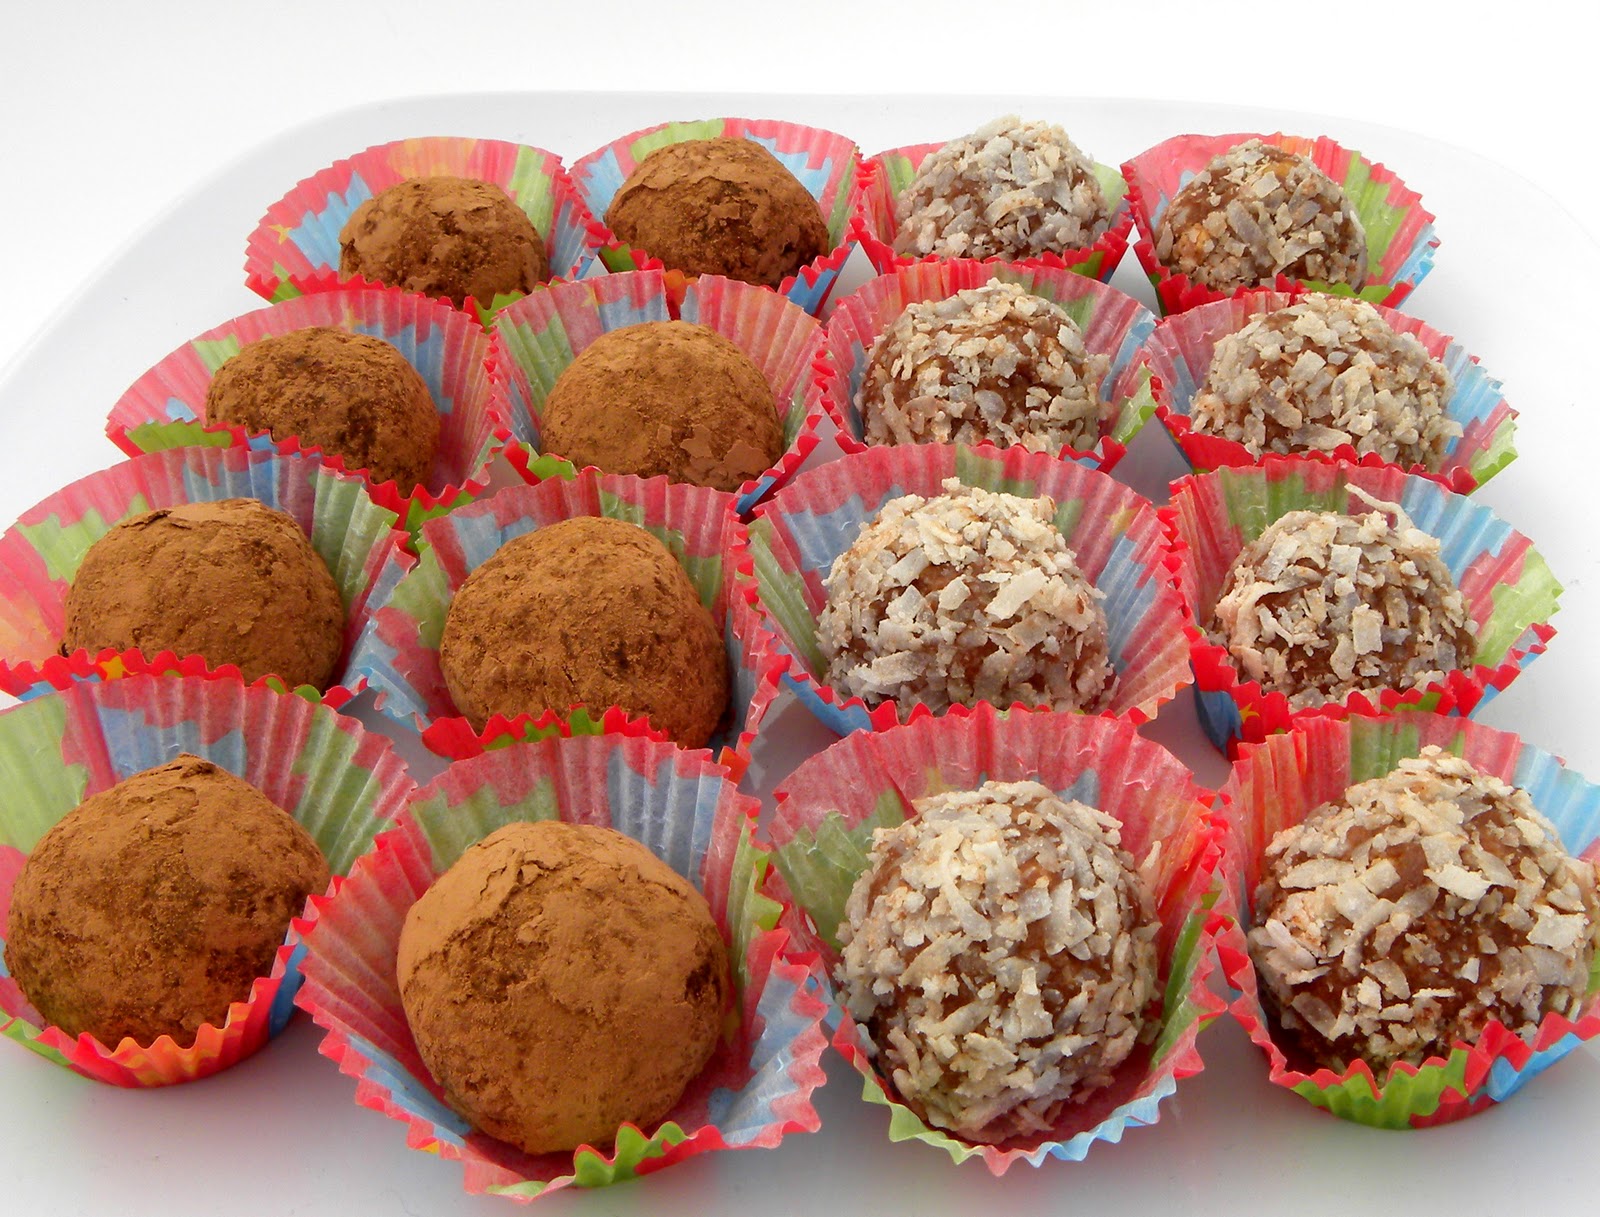 A bowl of small round rum balls